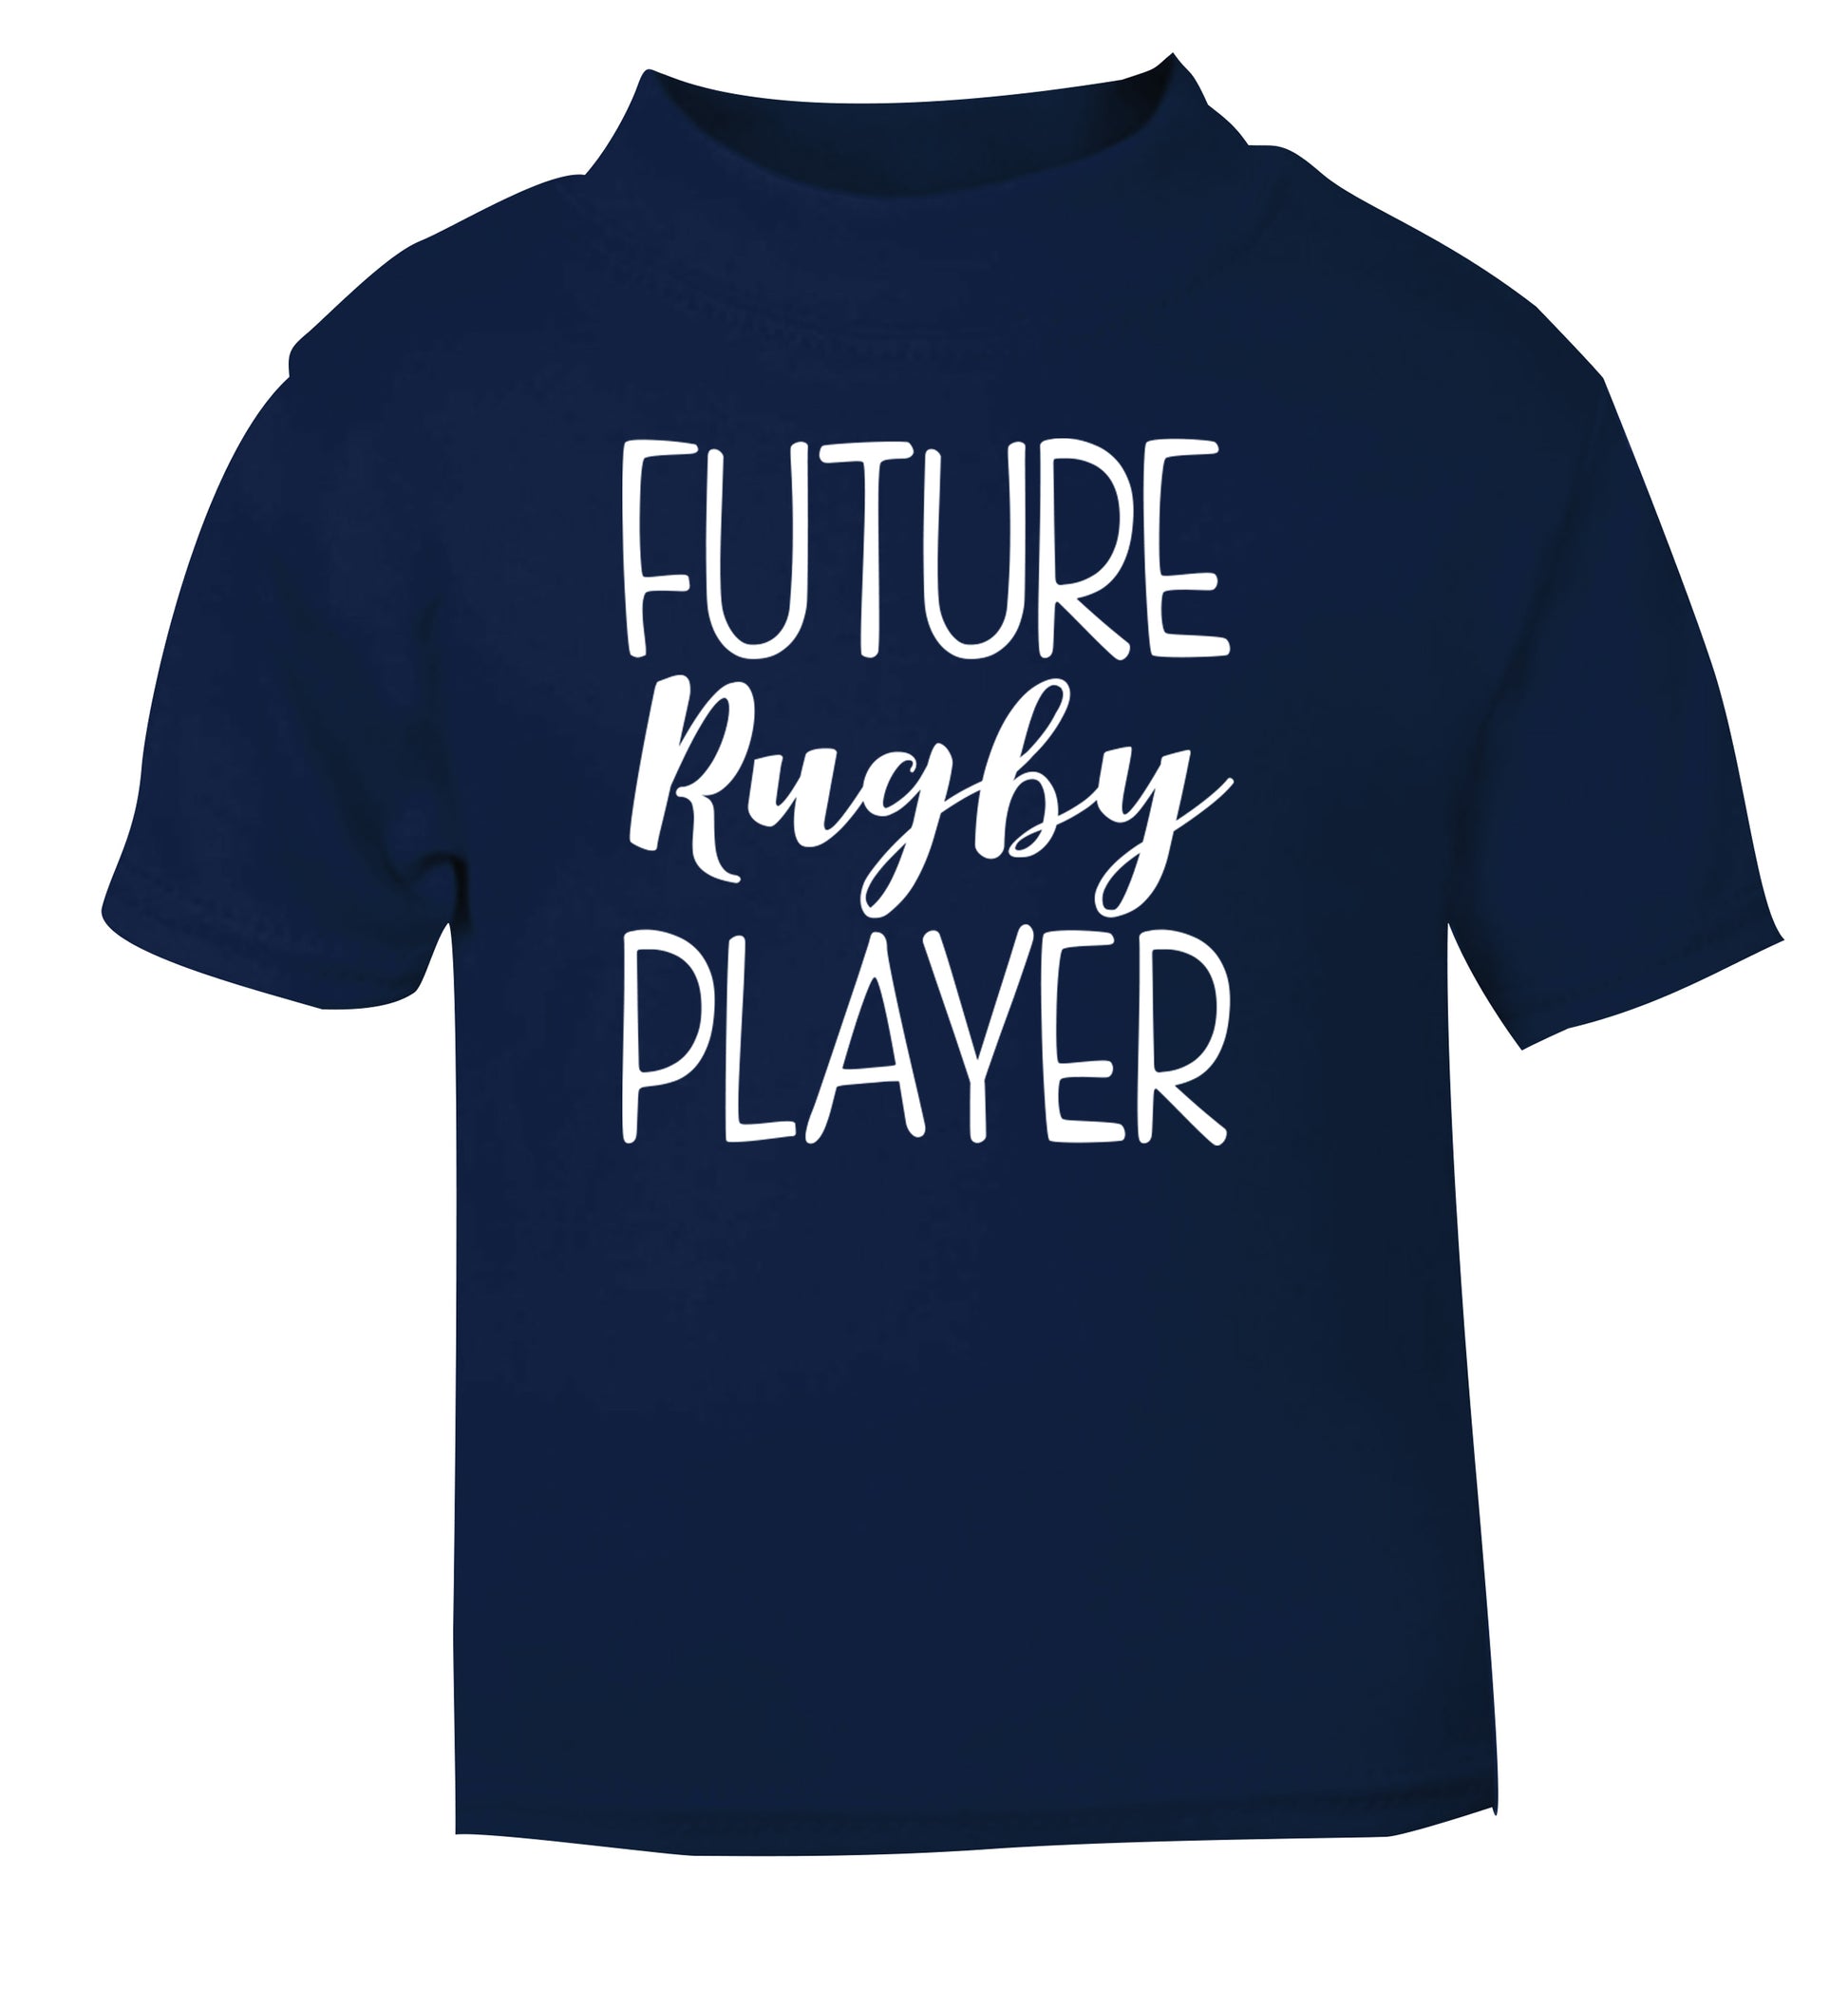 Future rugby player navy Baby Toddler Tshirt 2 Years